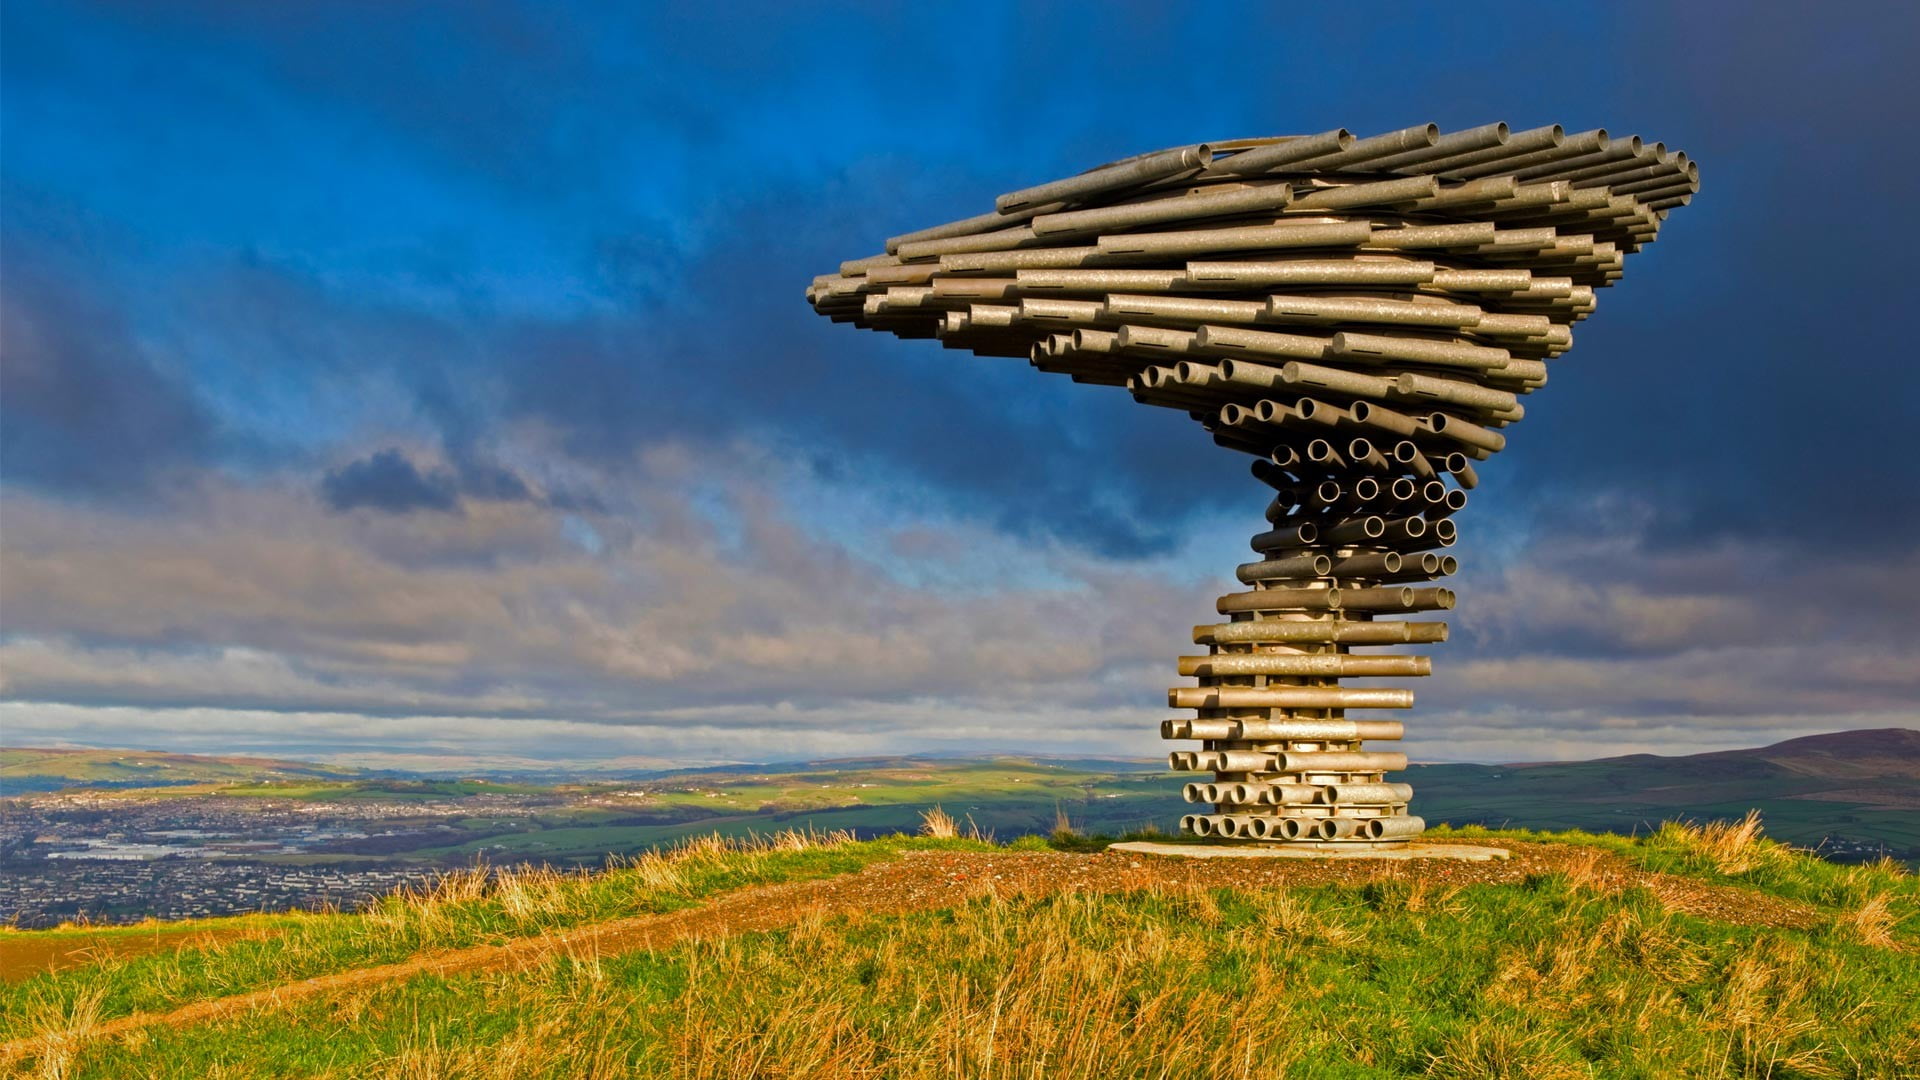 gray wooden spiral tower, nature, landscape, clouds, Burnley